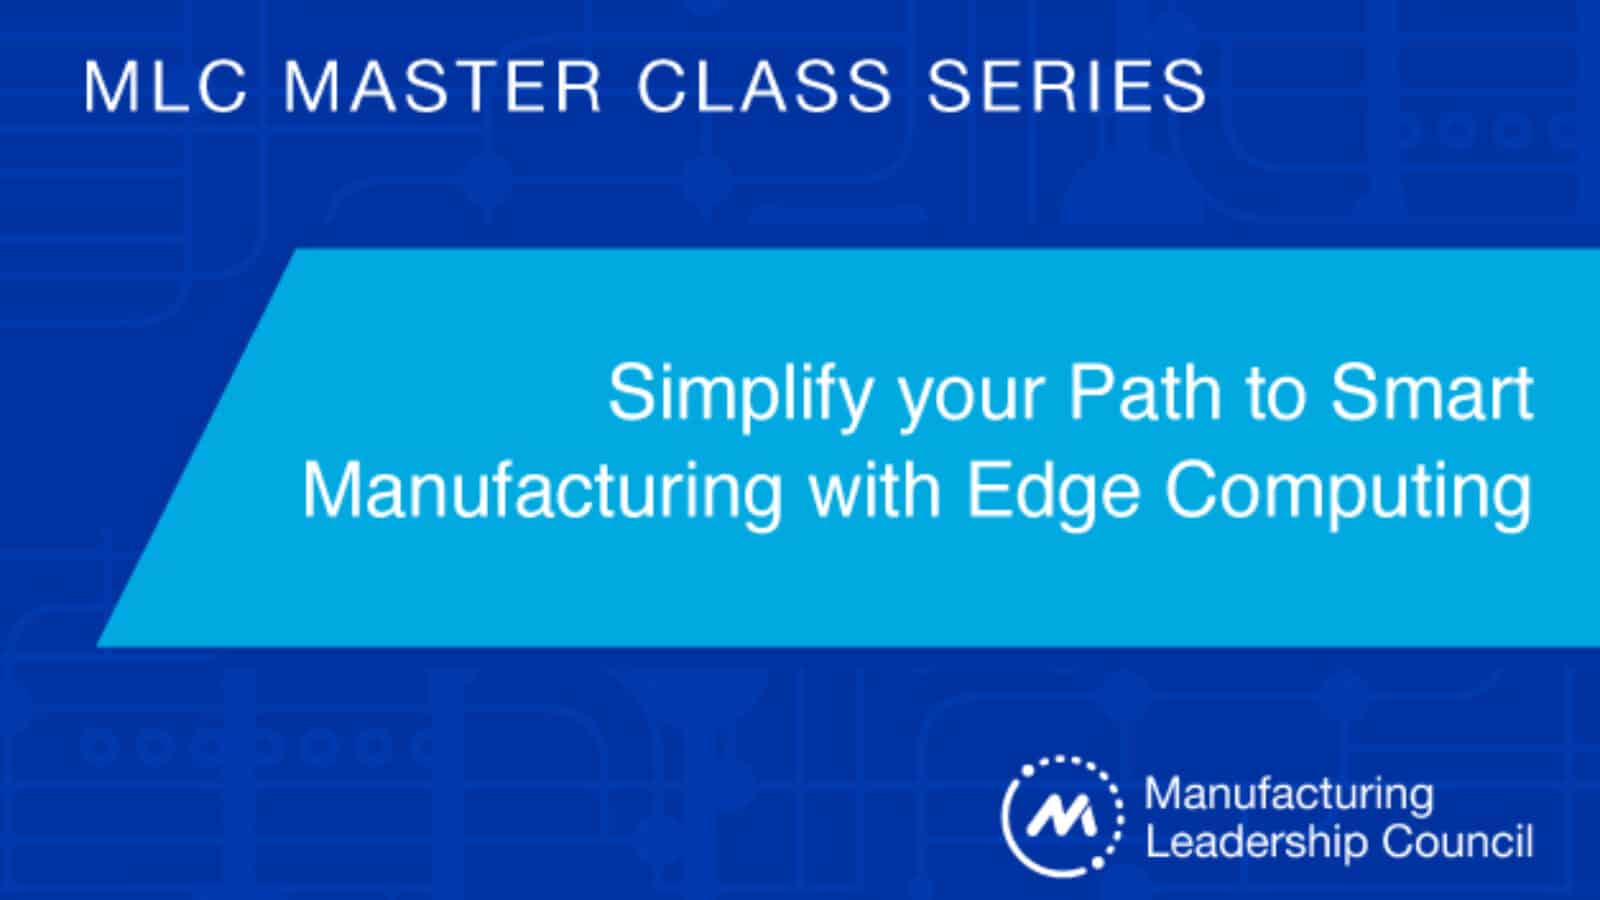 MLC Panel Discussion: Simplify Your Path to Smart Manufacturing with Edge Computing